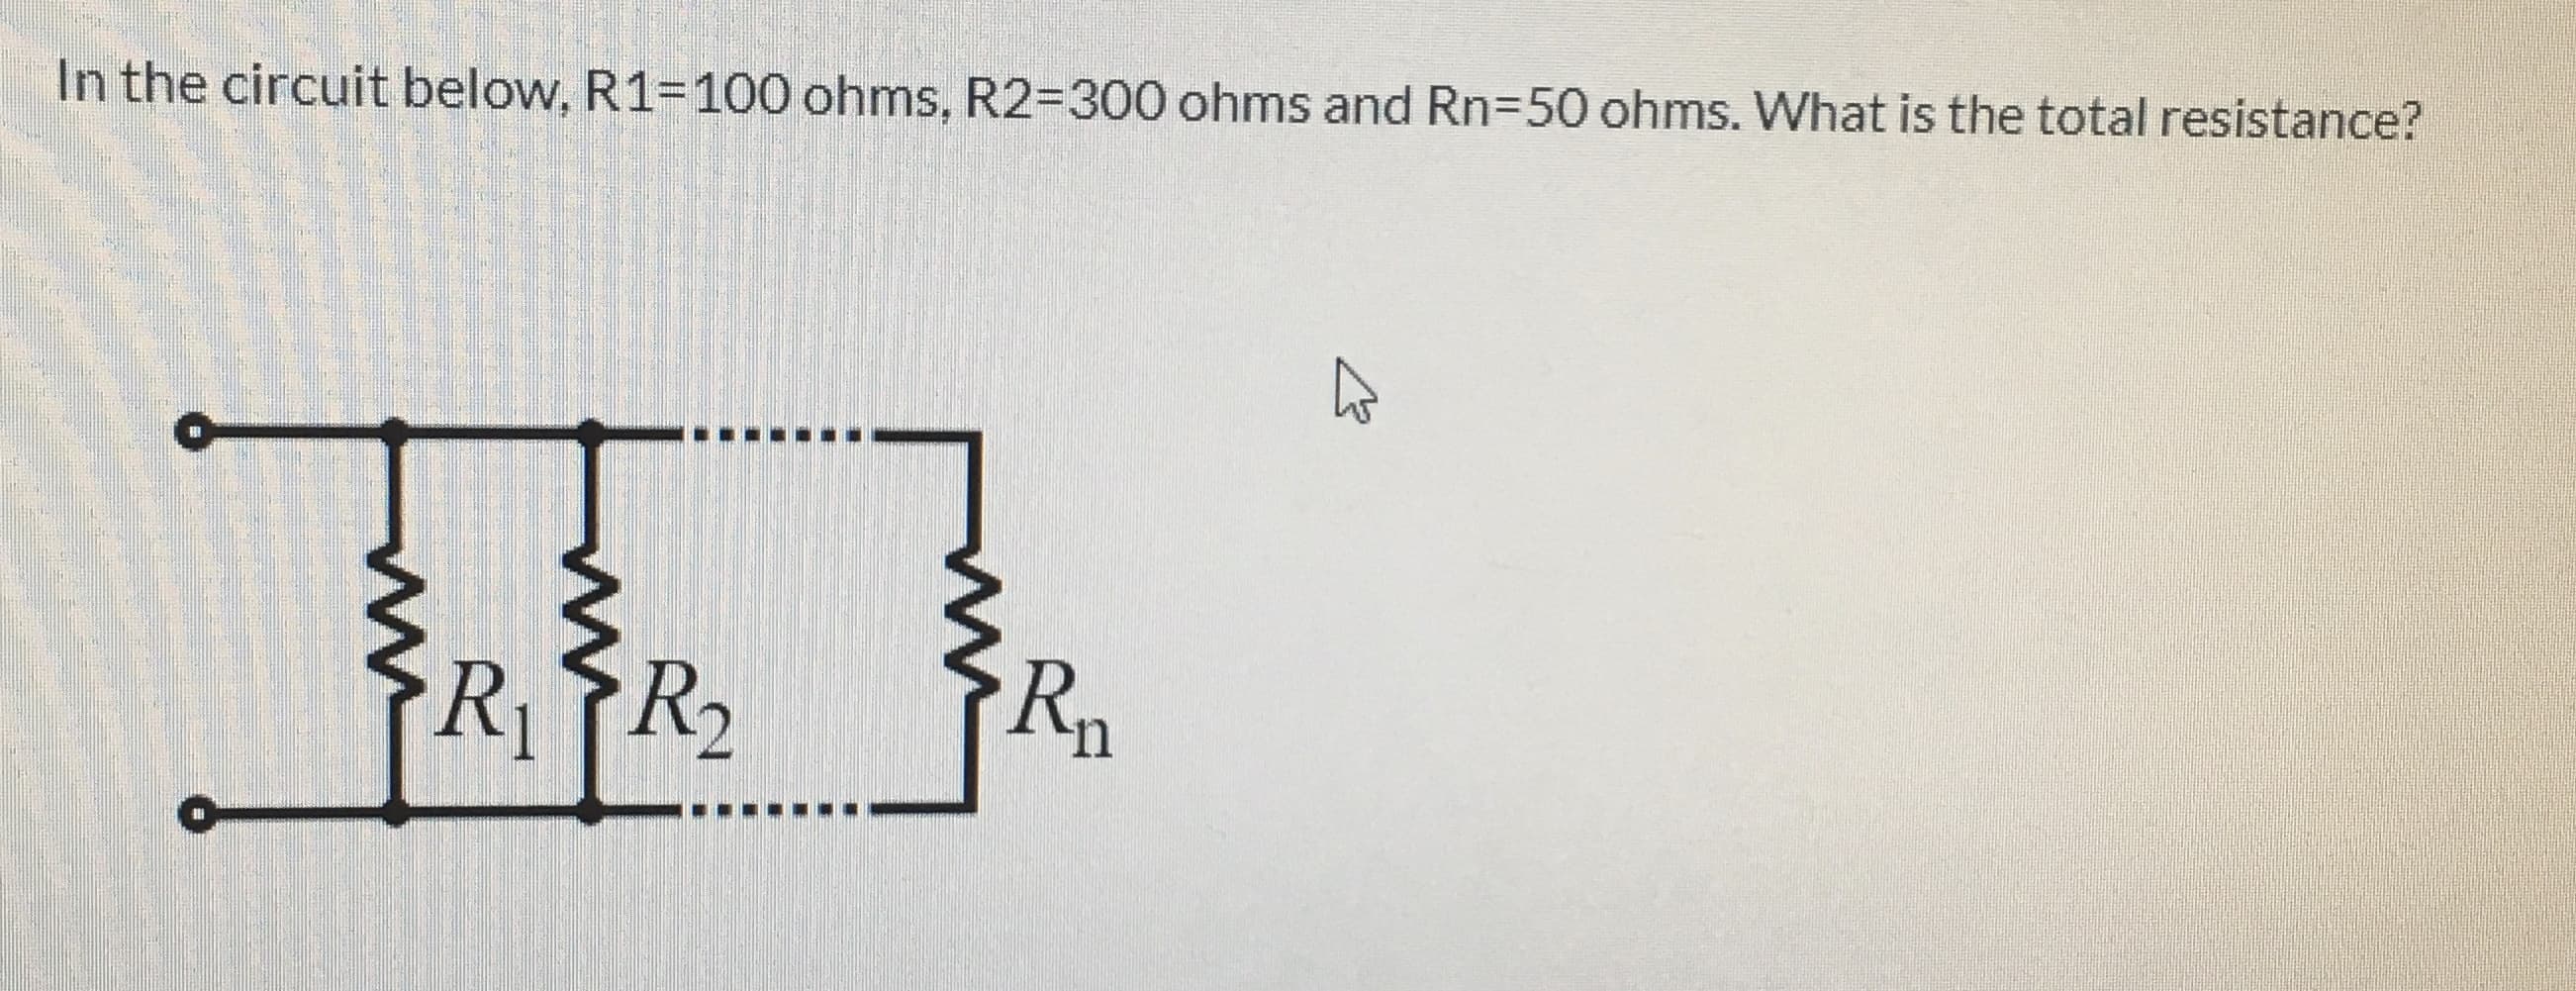 In the circuit below, R1-100 ohms, R2-300 ohms and Rn-50 ohms. What is the total resistance?
R
RR2
